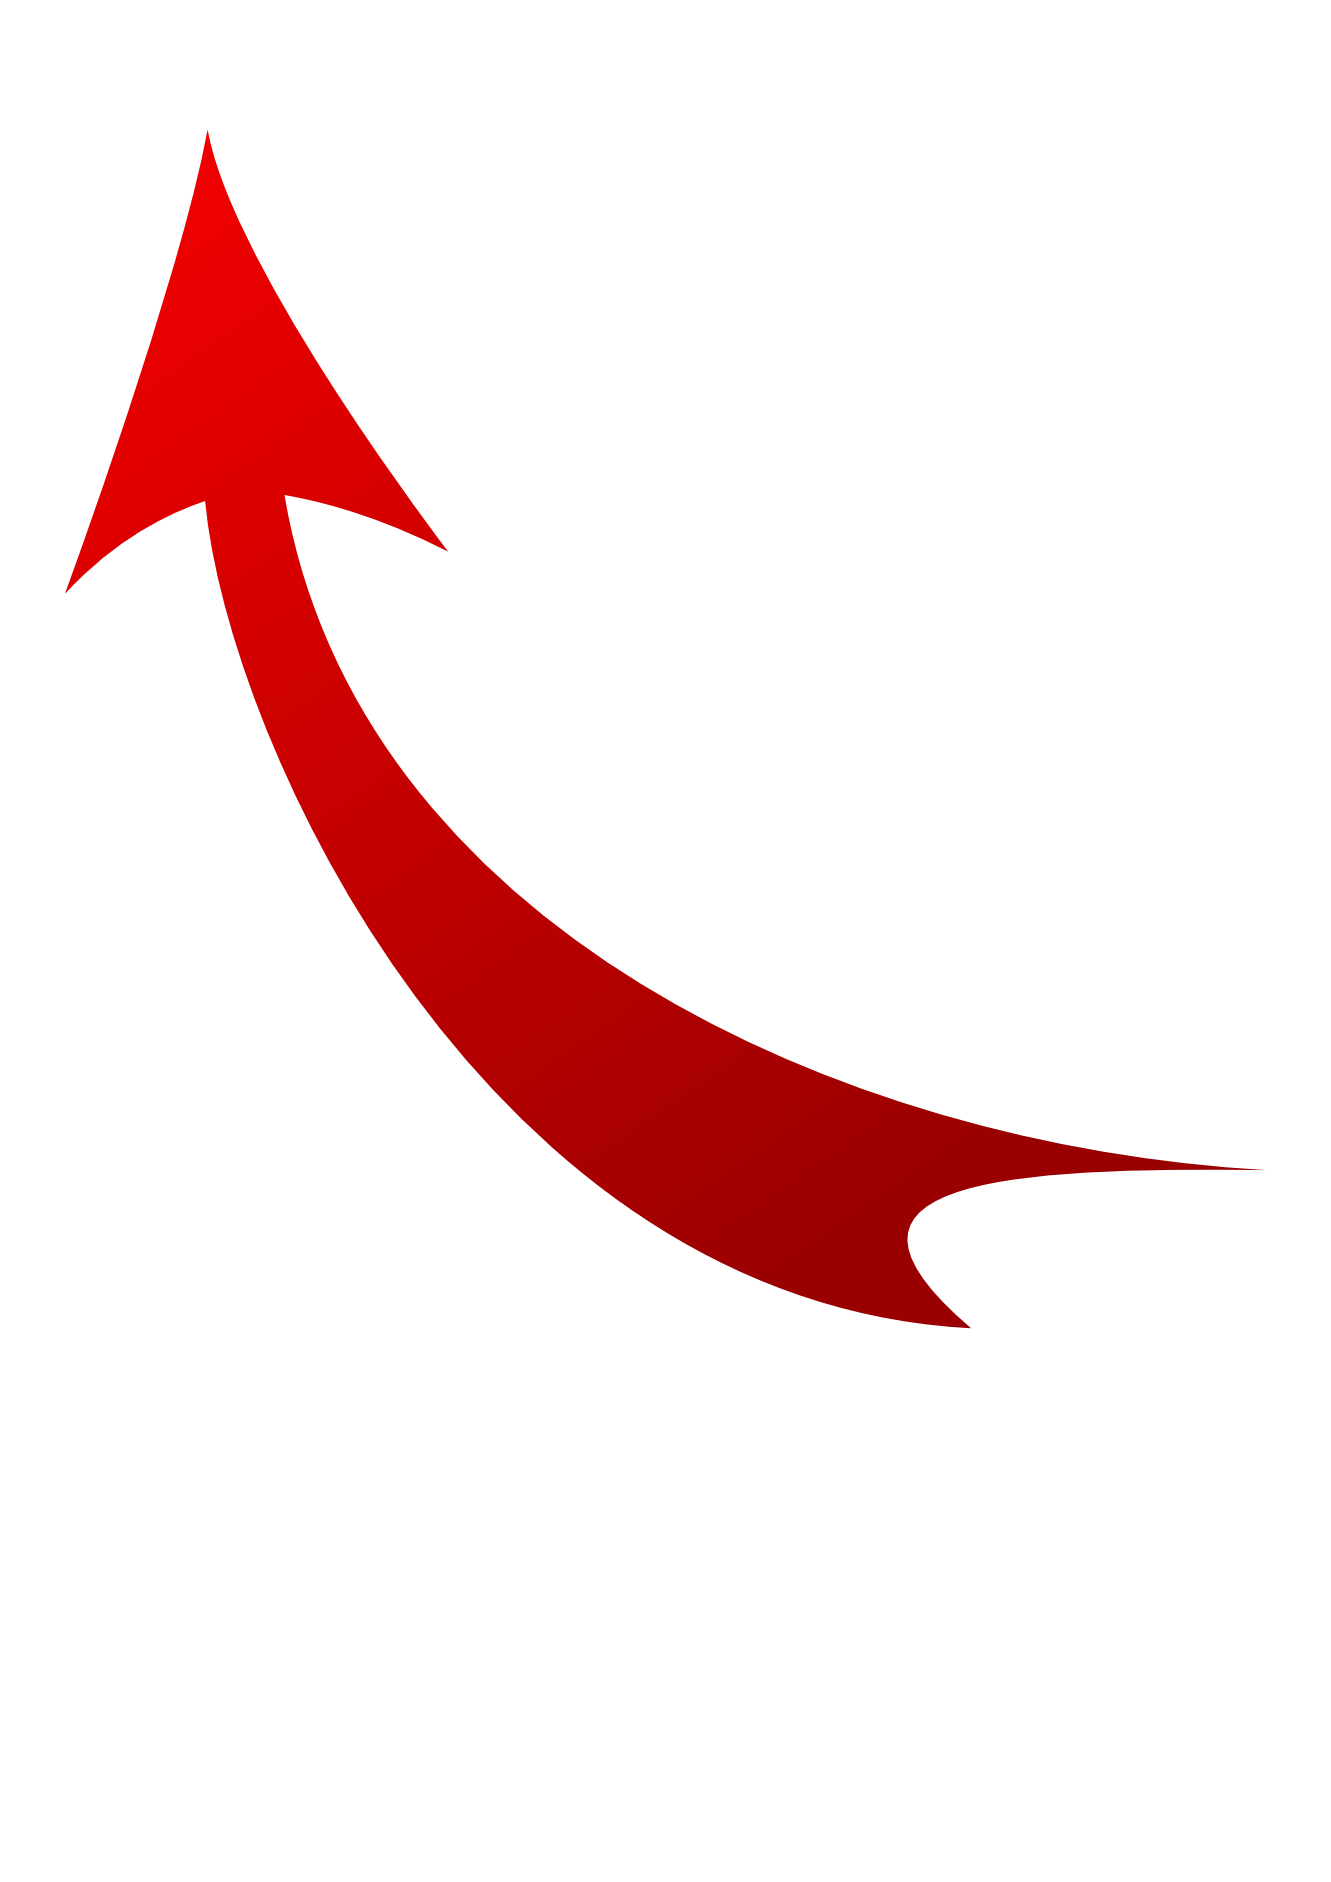 Curved up arrow png #12456.